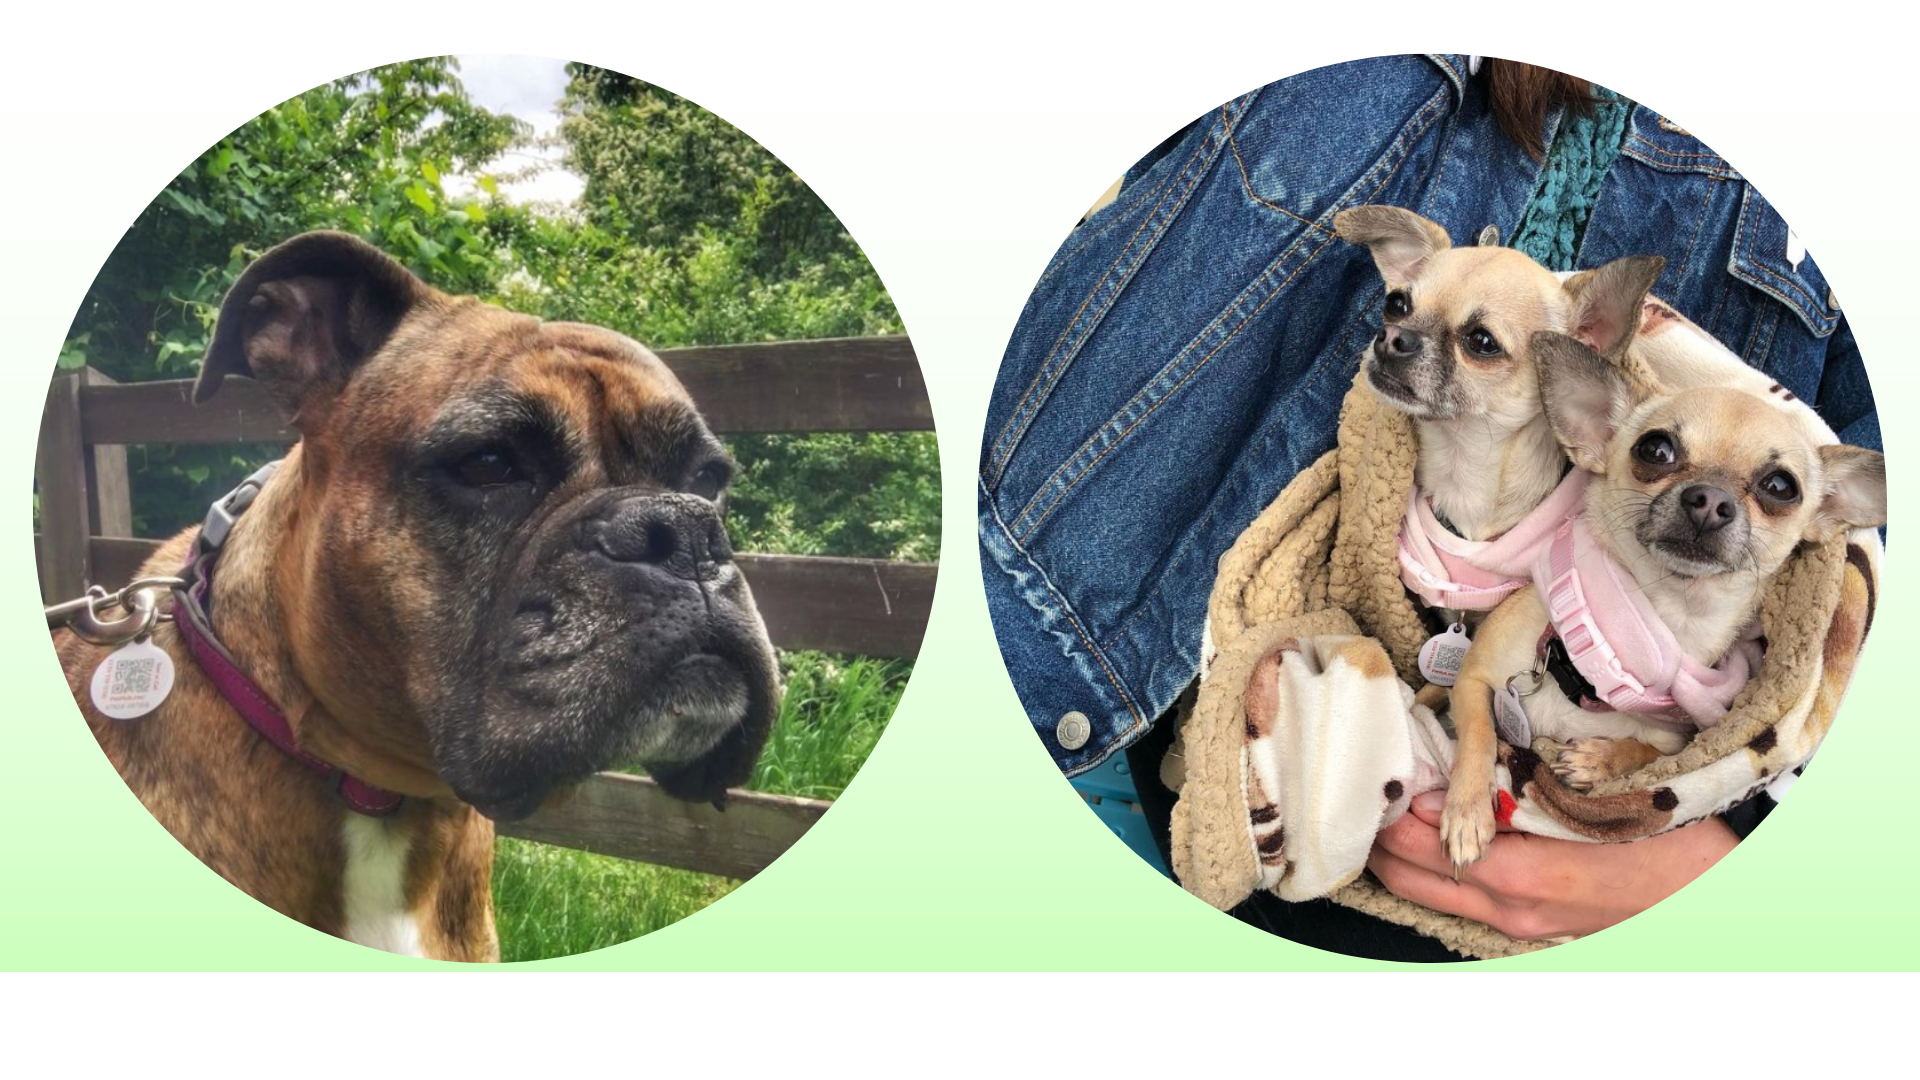 Boxer and Chihuahuas in PetHub ID Tags